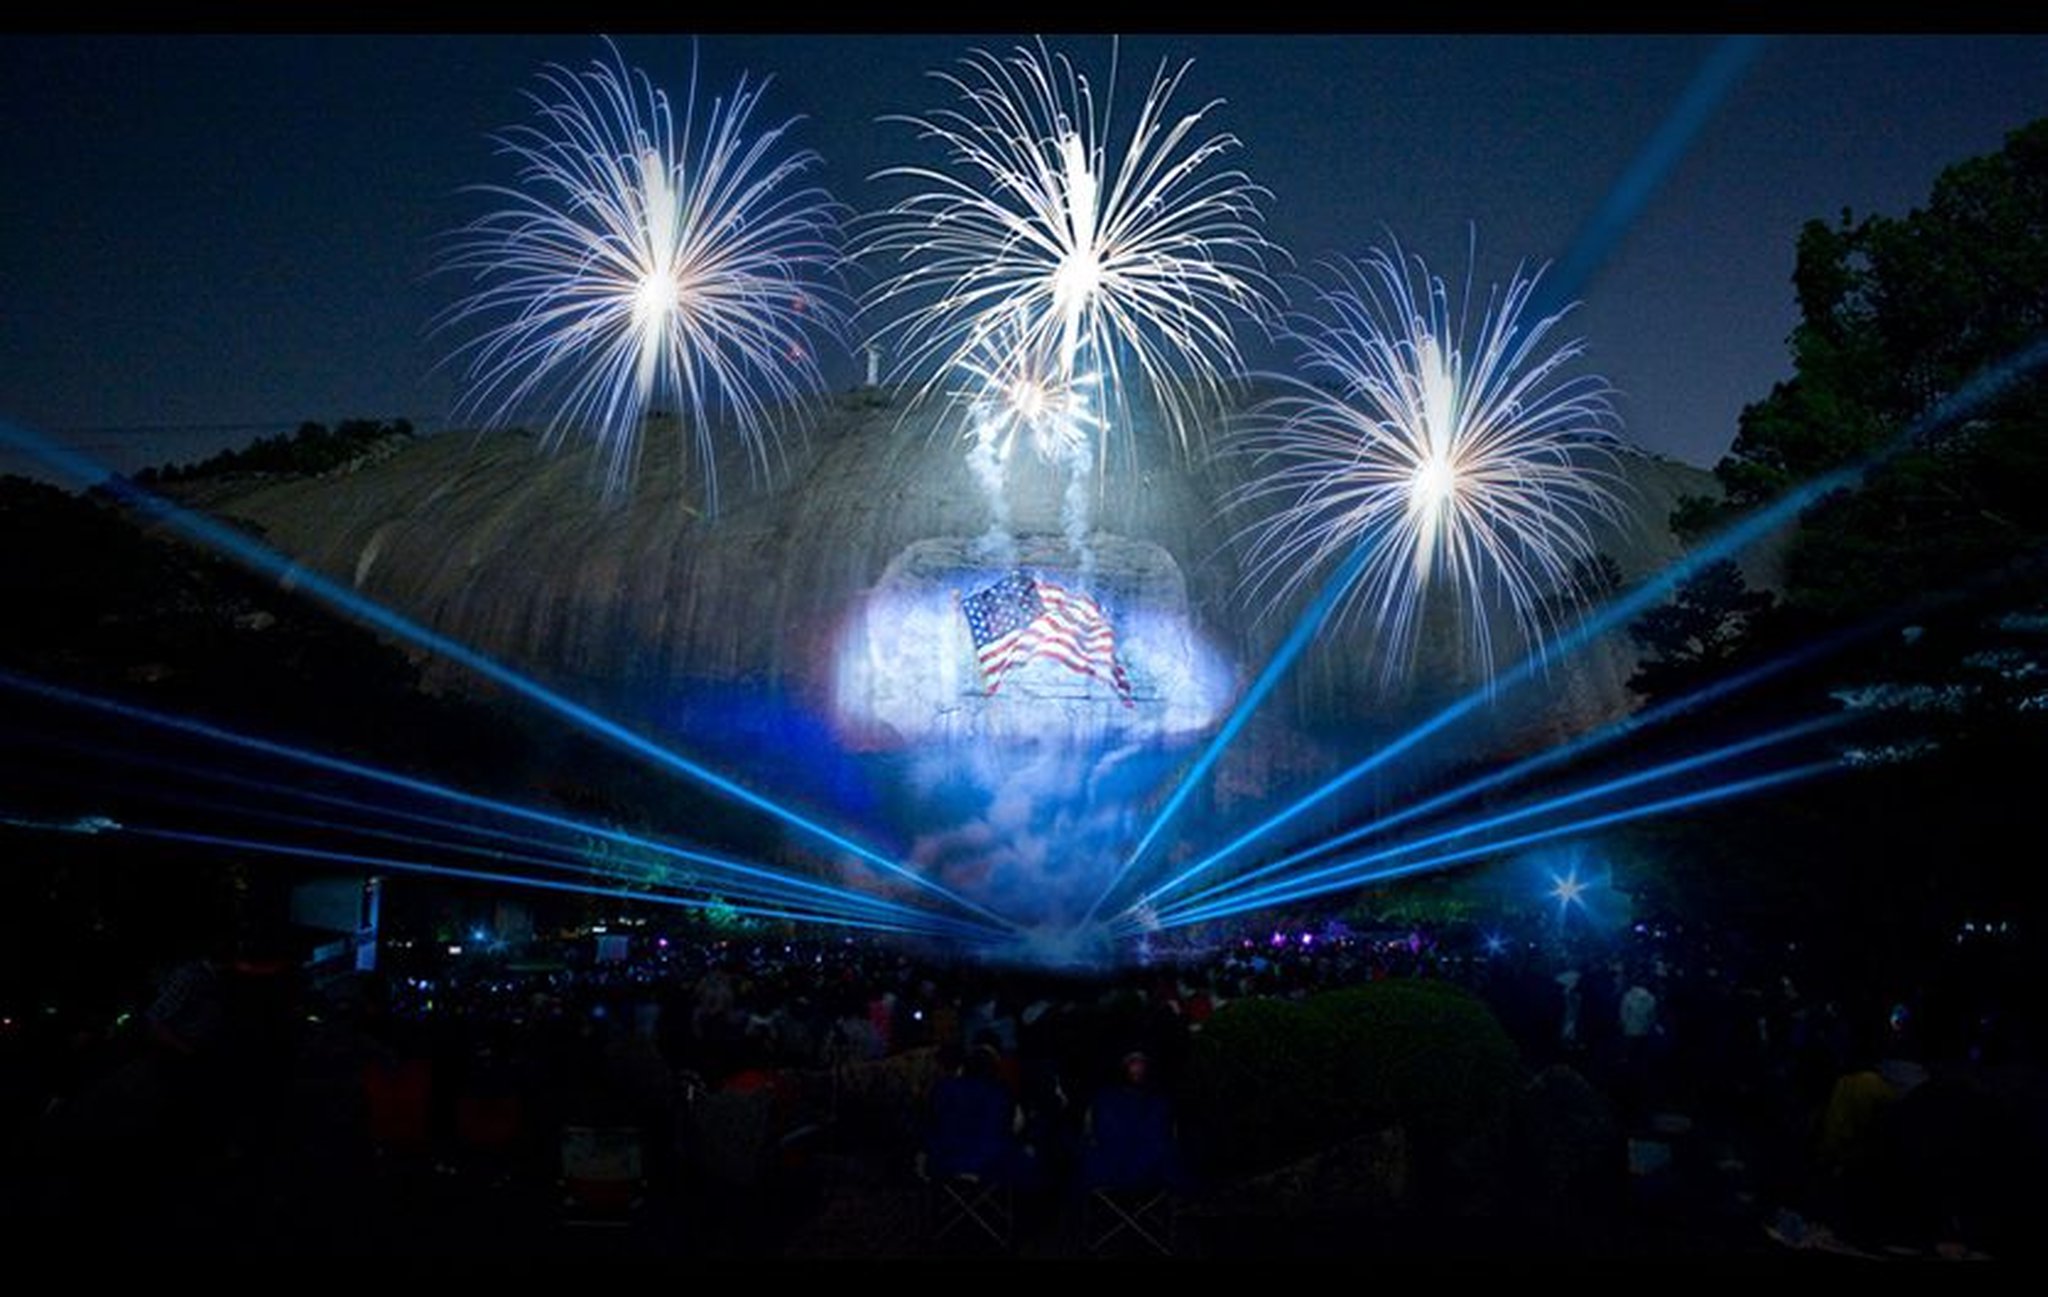 Fireworks displays may be viewed all around metro Atlanta next week, including at Stone Mountain Park. CONTRIBUTED BY STONE MOUNTAIN PARK